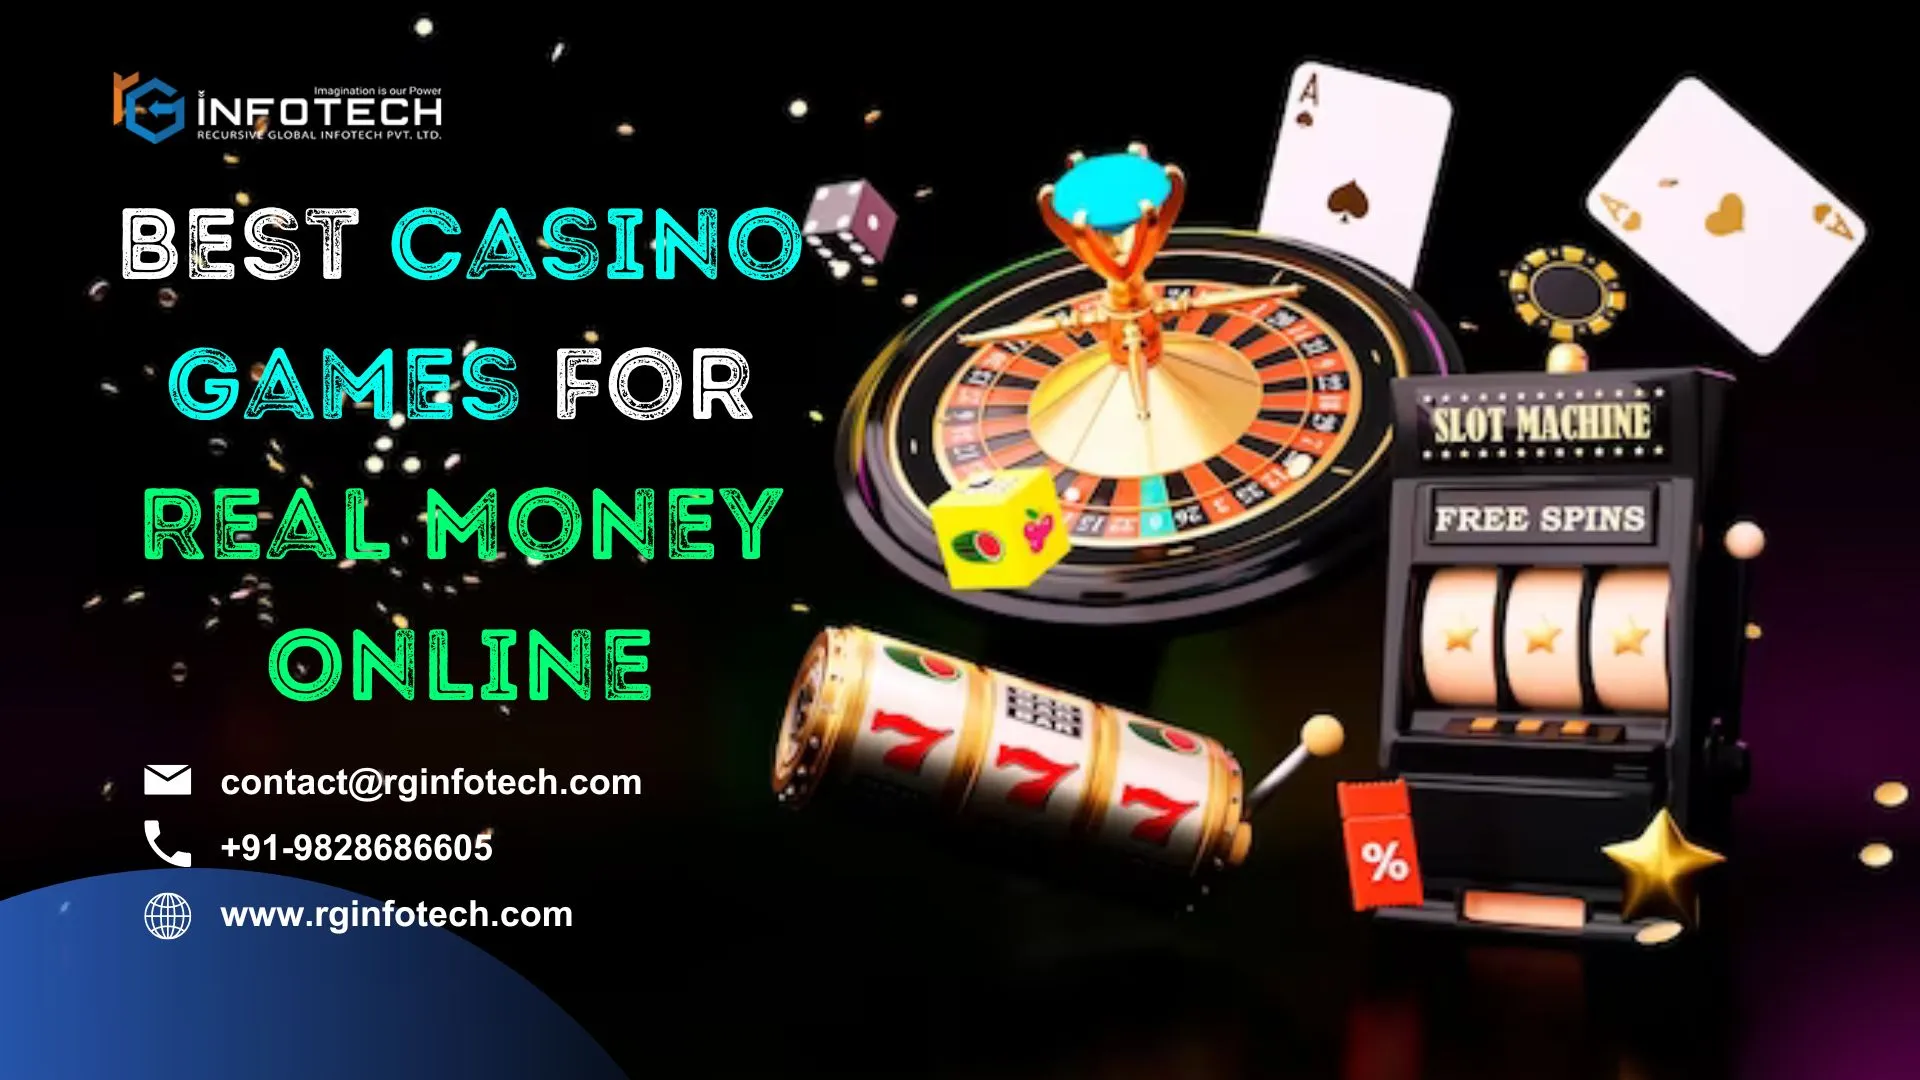 How To Find The Time To VIP Programs and Loyalty Rewards in Indian Online Casinos On Facebook